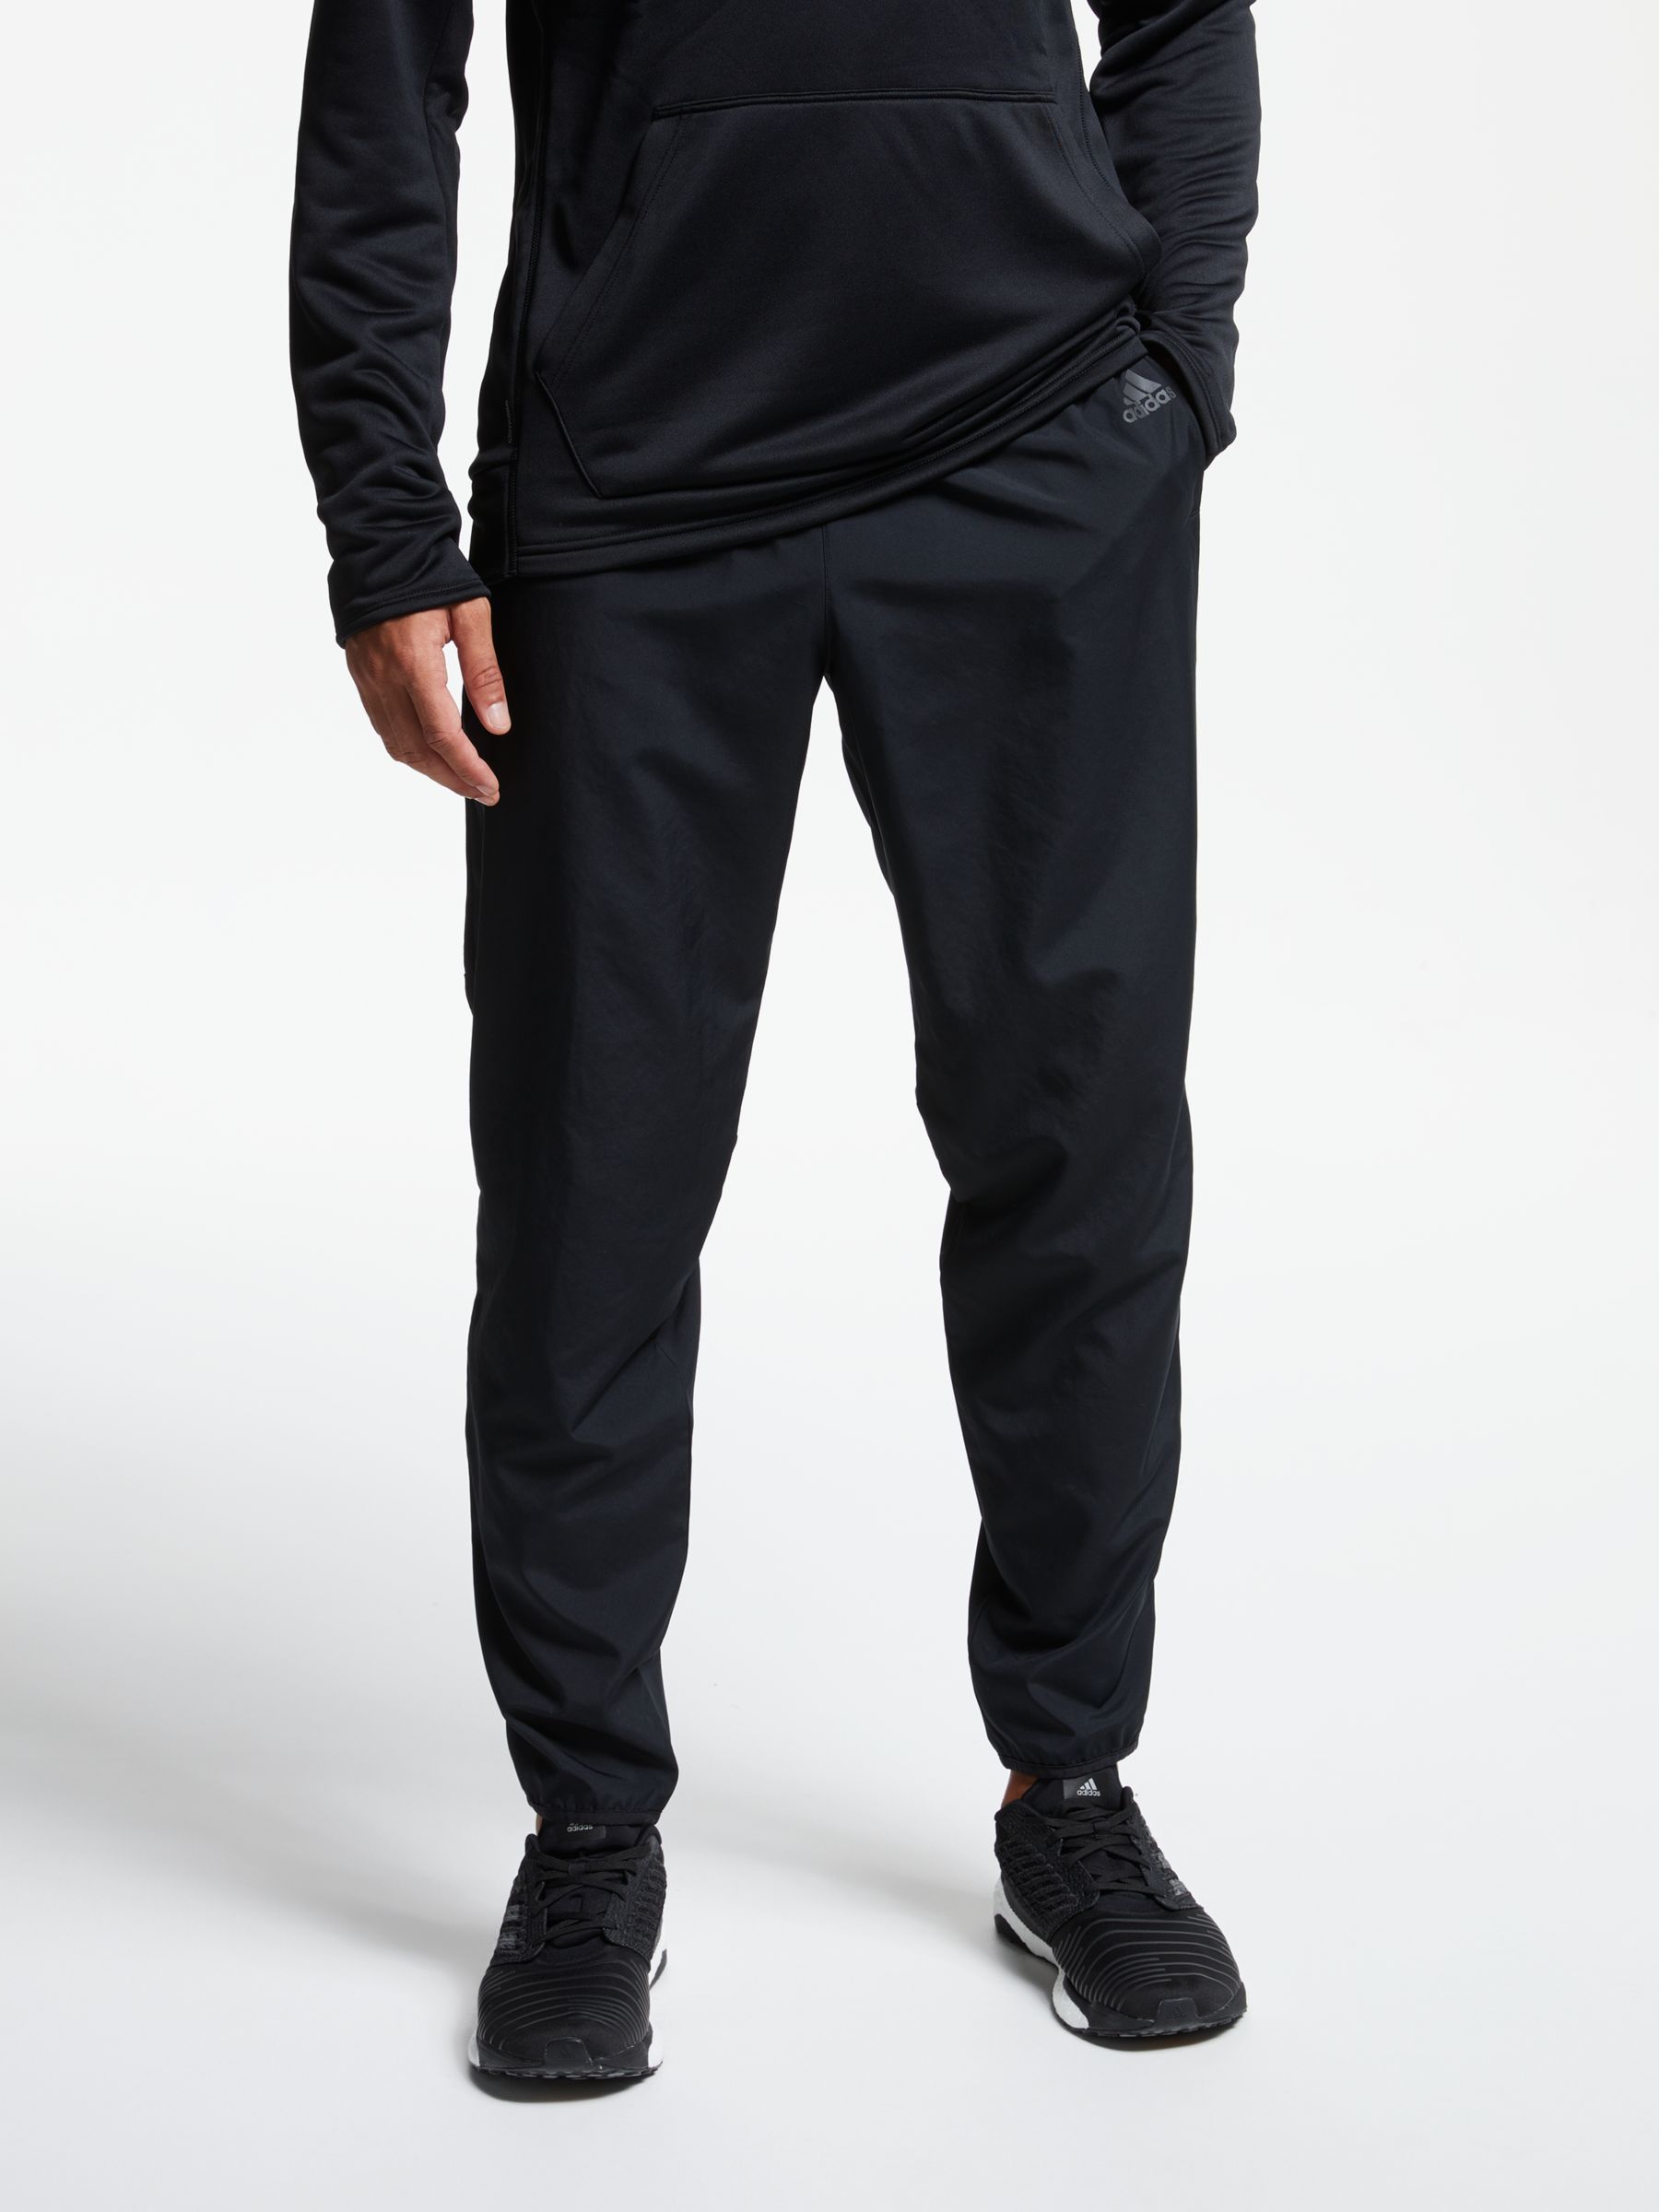 adidas all black tracksuit bottoms